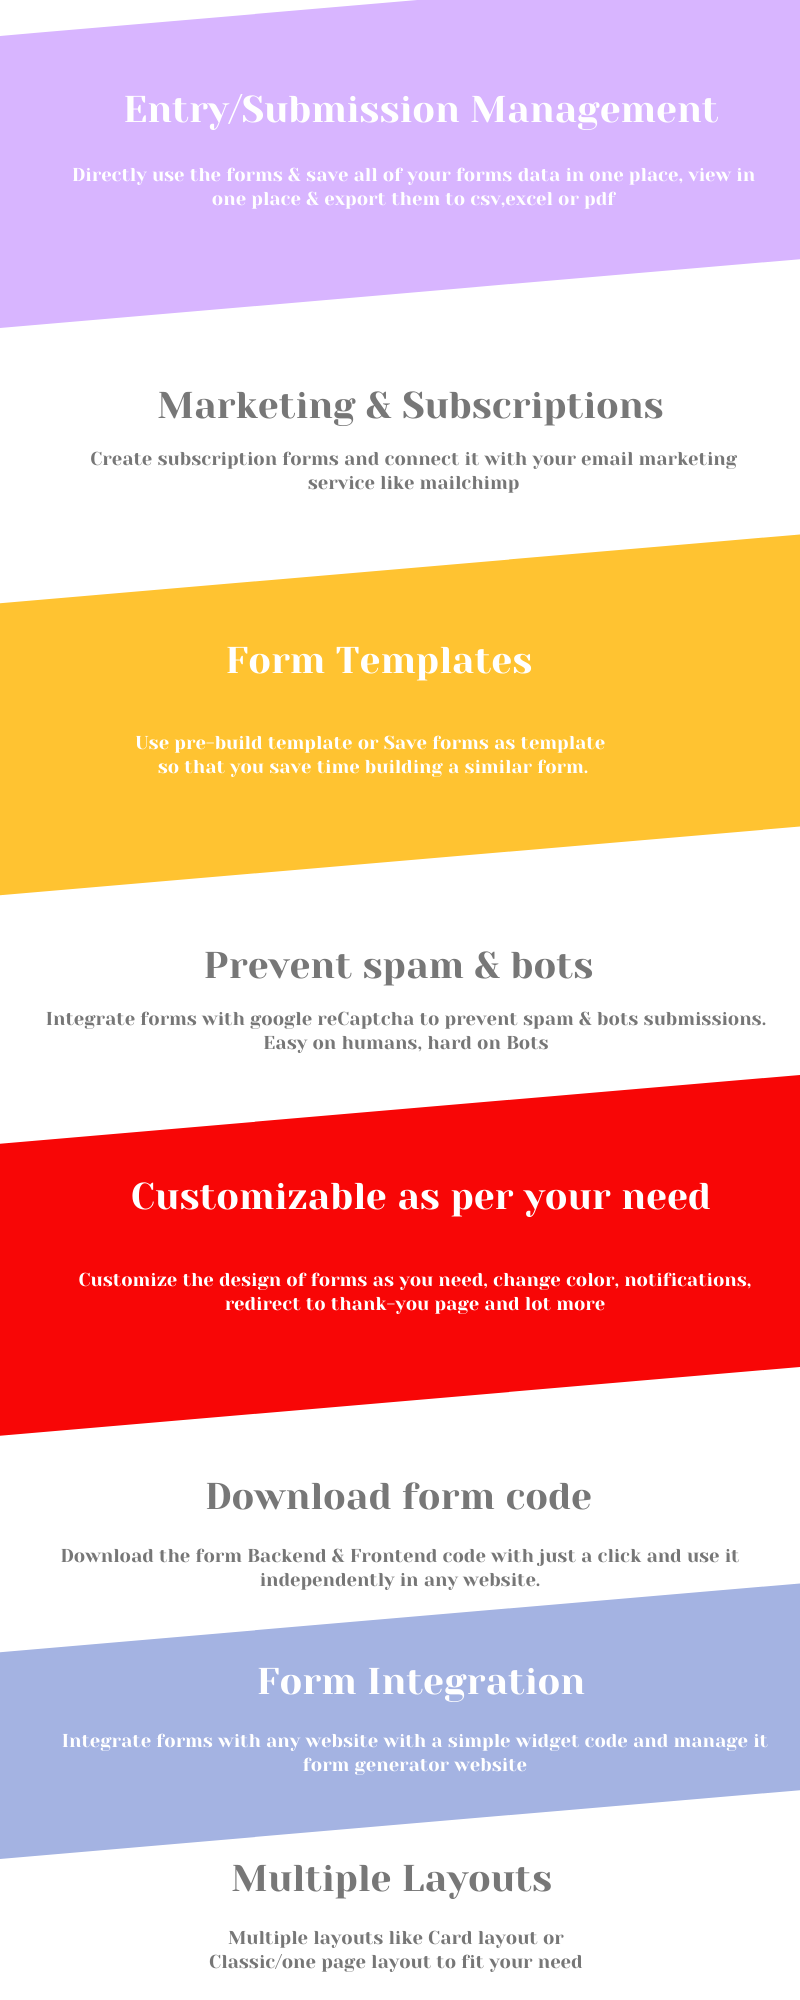 Multi-Purpose Form Generator & docusign (All types of forms) with SaaS - 2